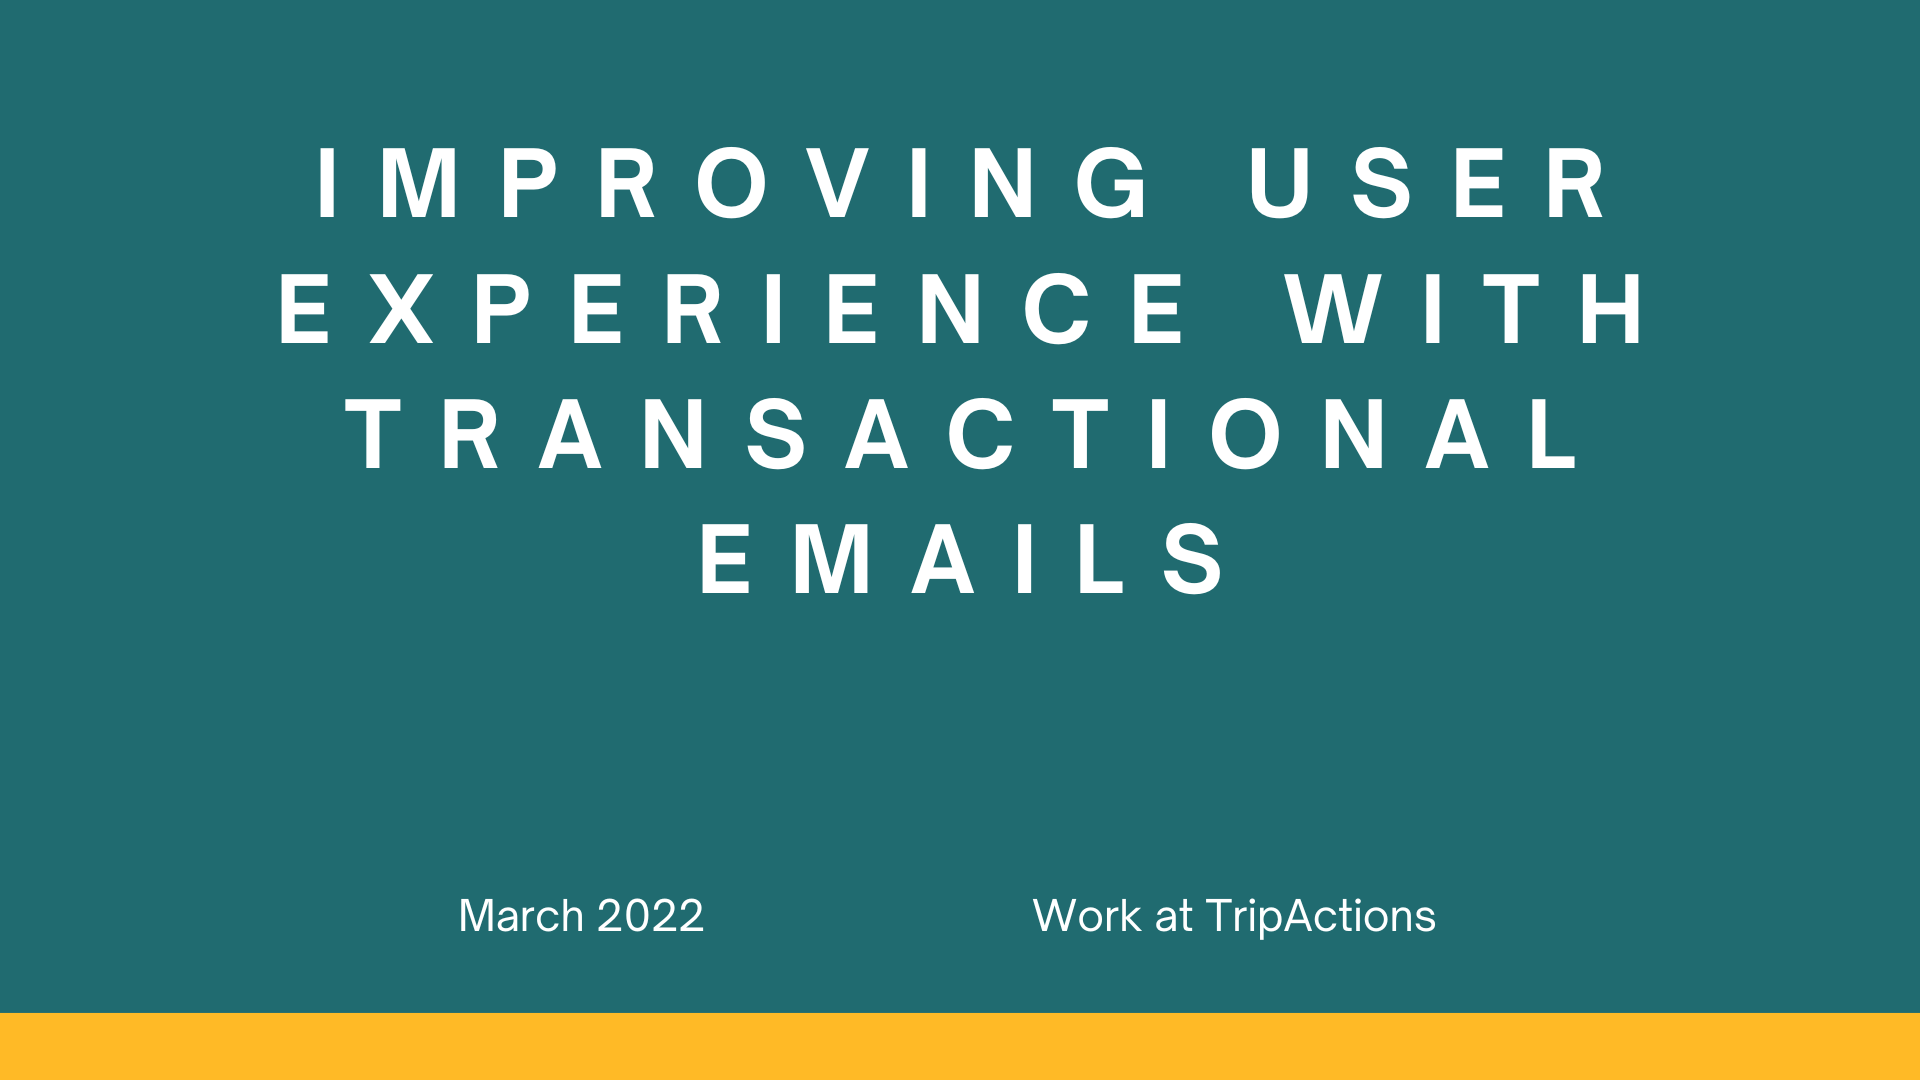 Protected: Improving user experience with transactional emails